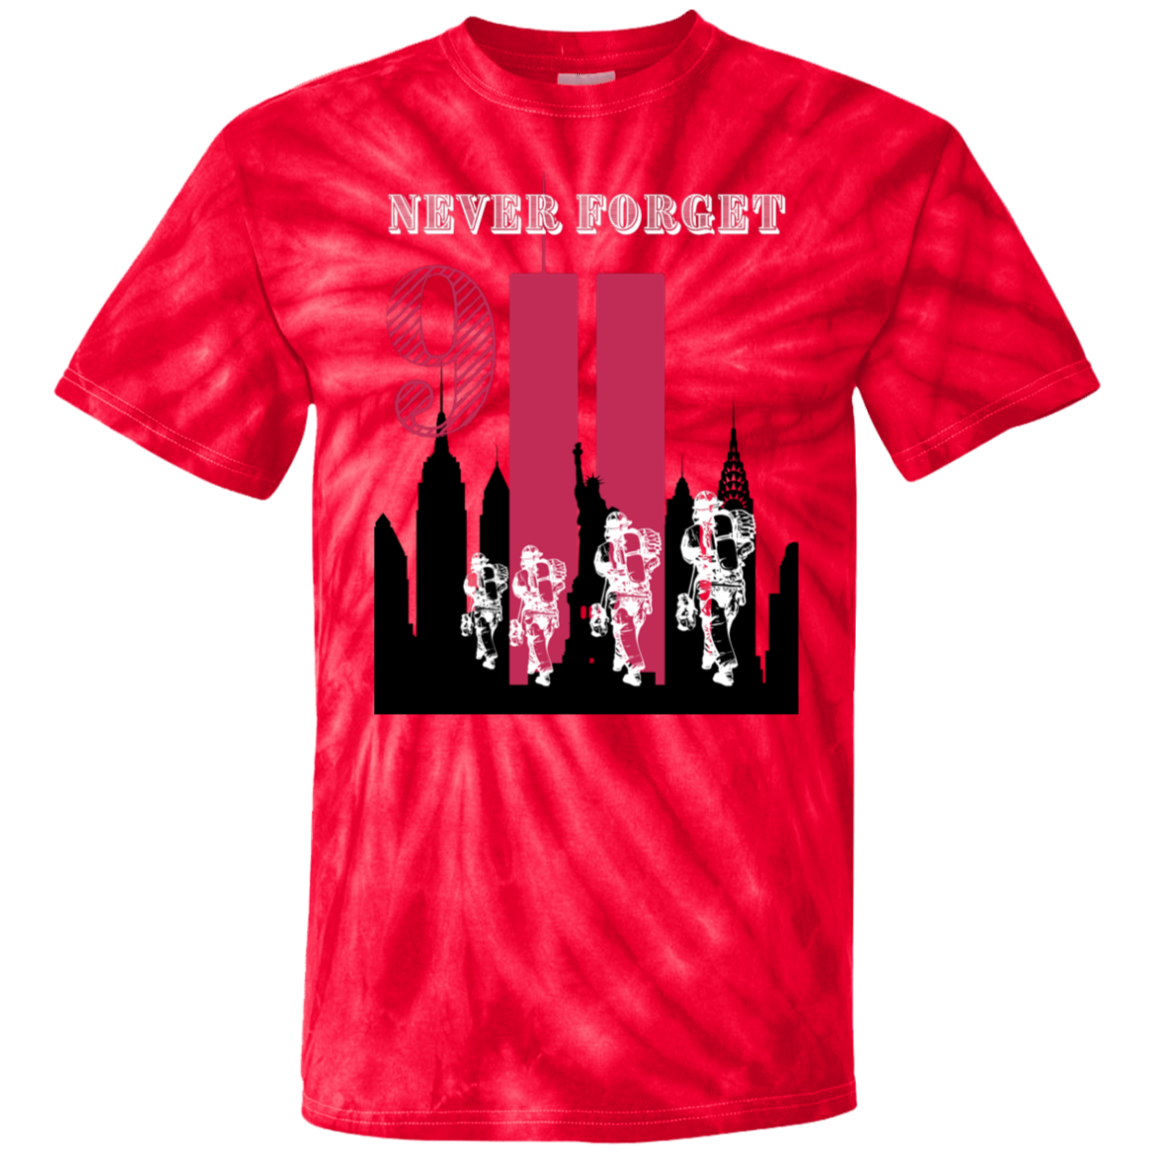 NEVER FORGET YOUTH Tie Dye T-Shirt